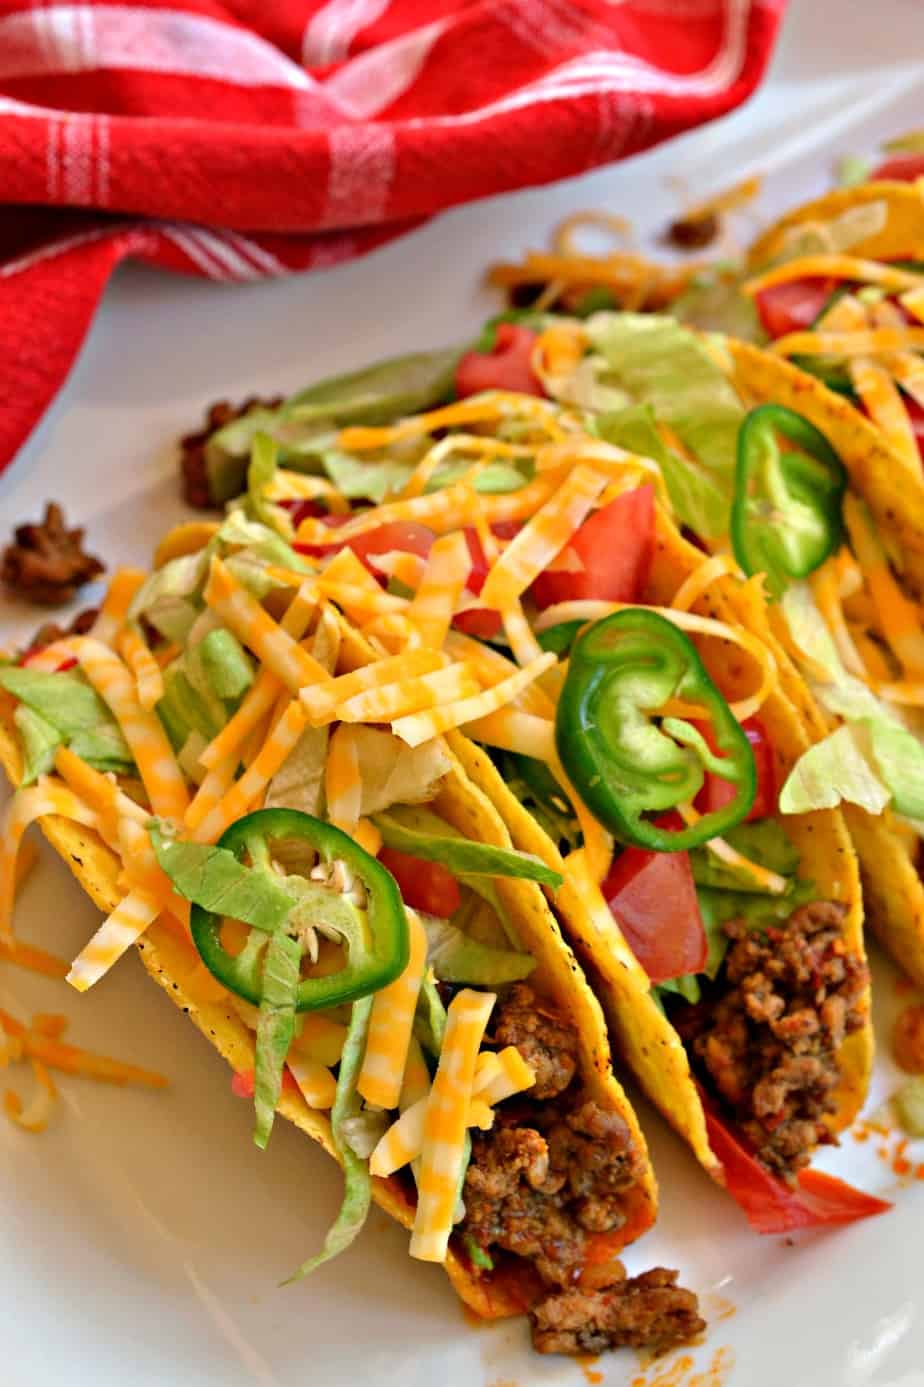 Ground Beef Tacos (A Super Easy Weeknight Meal)